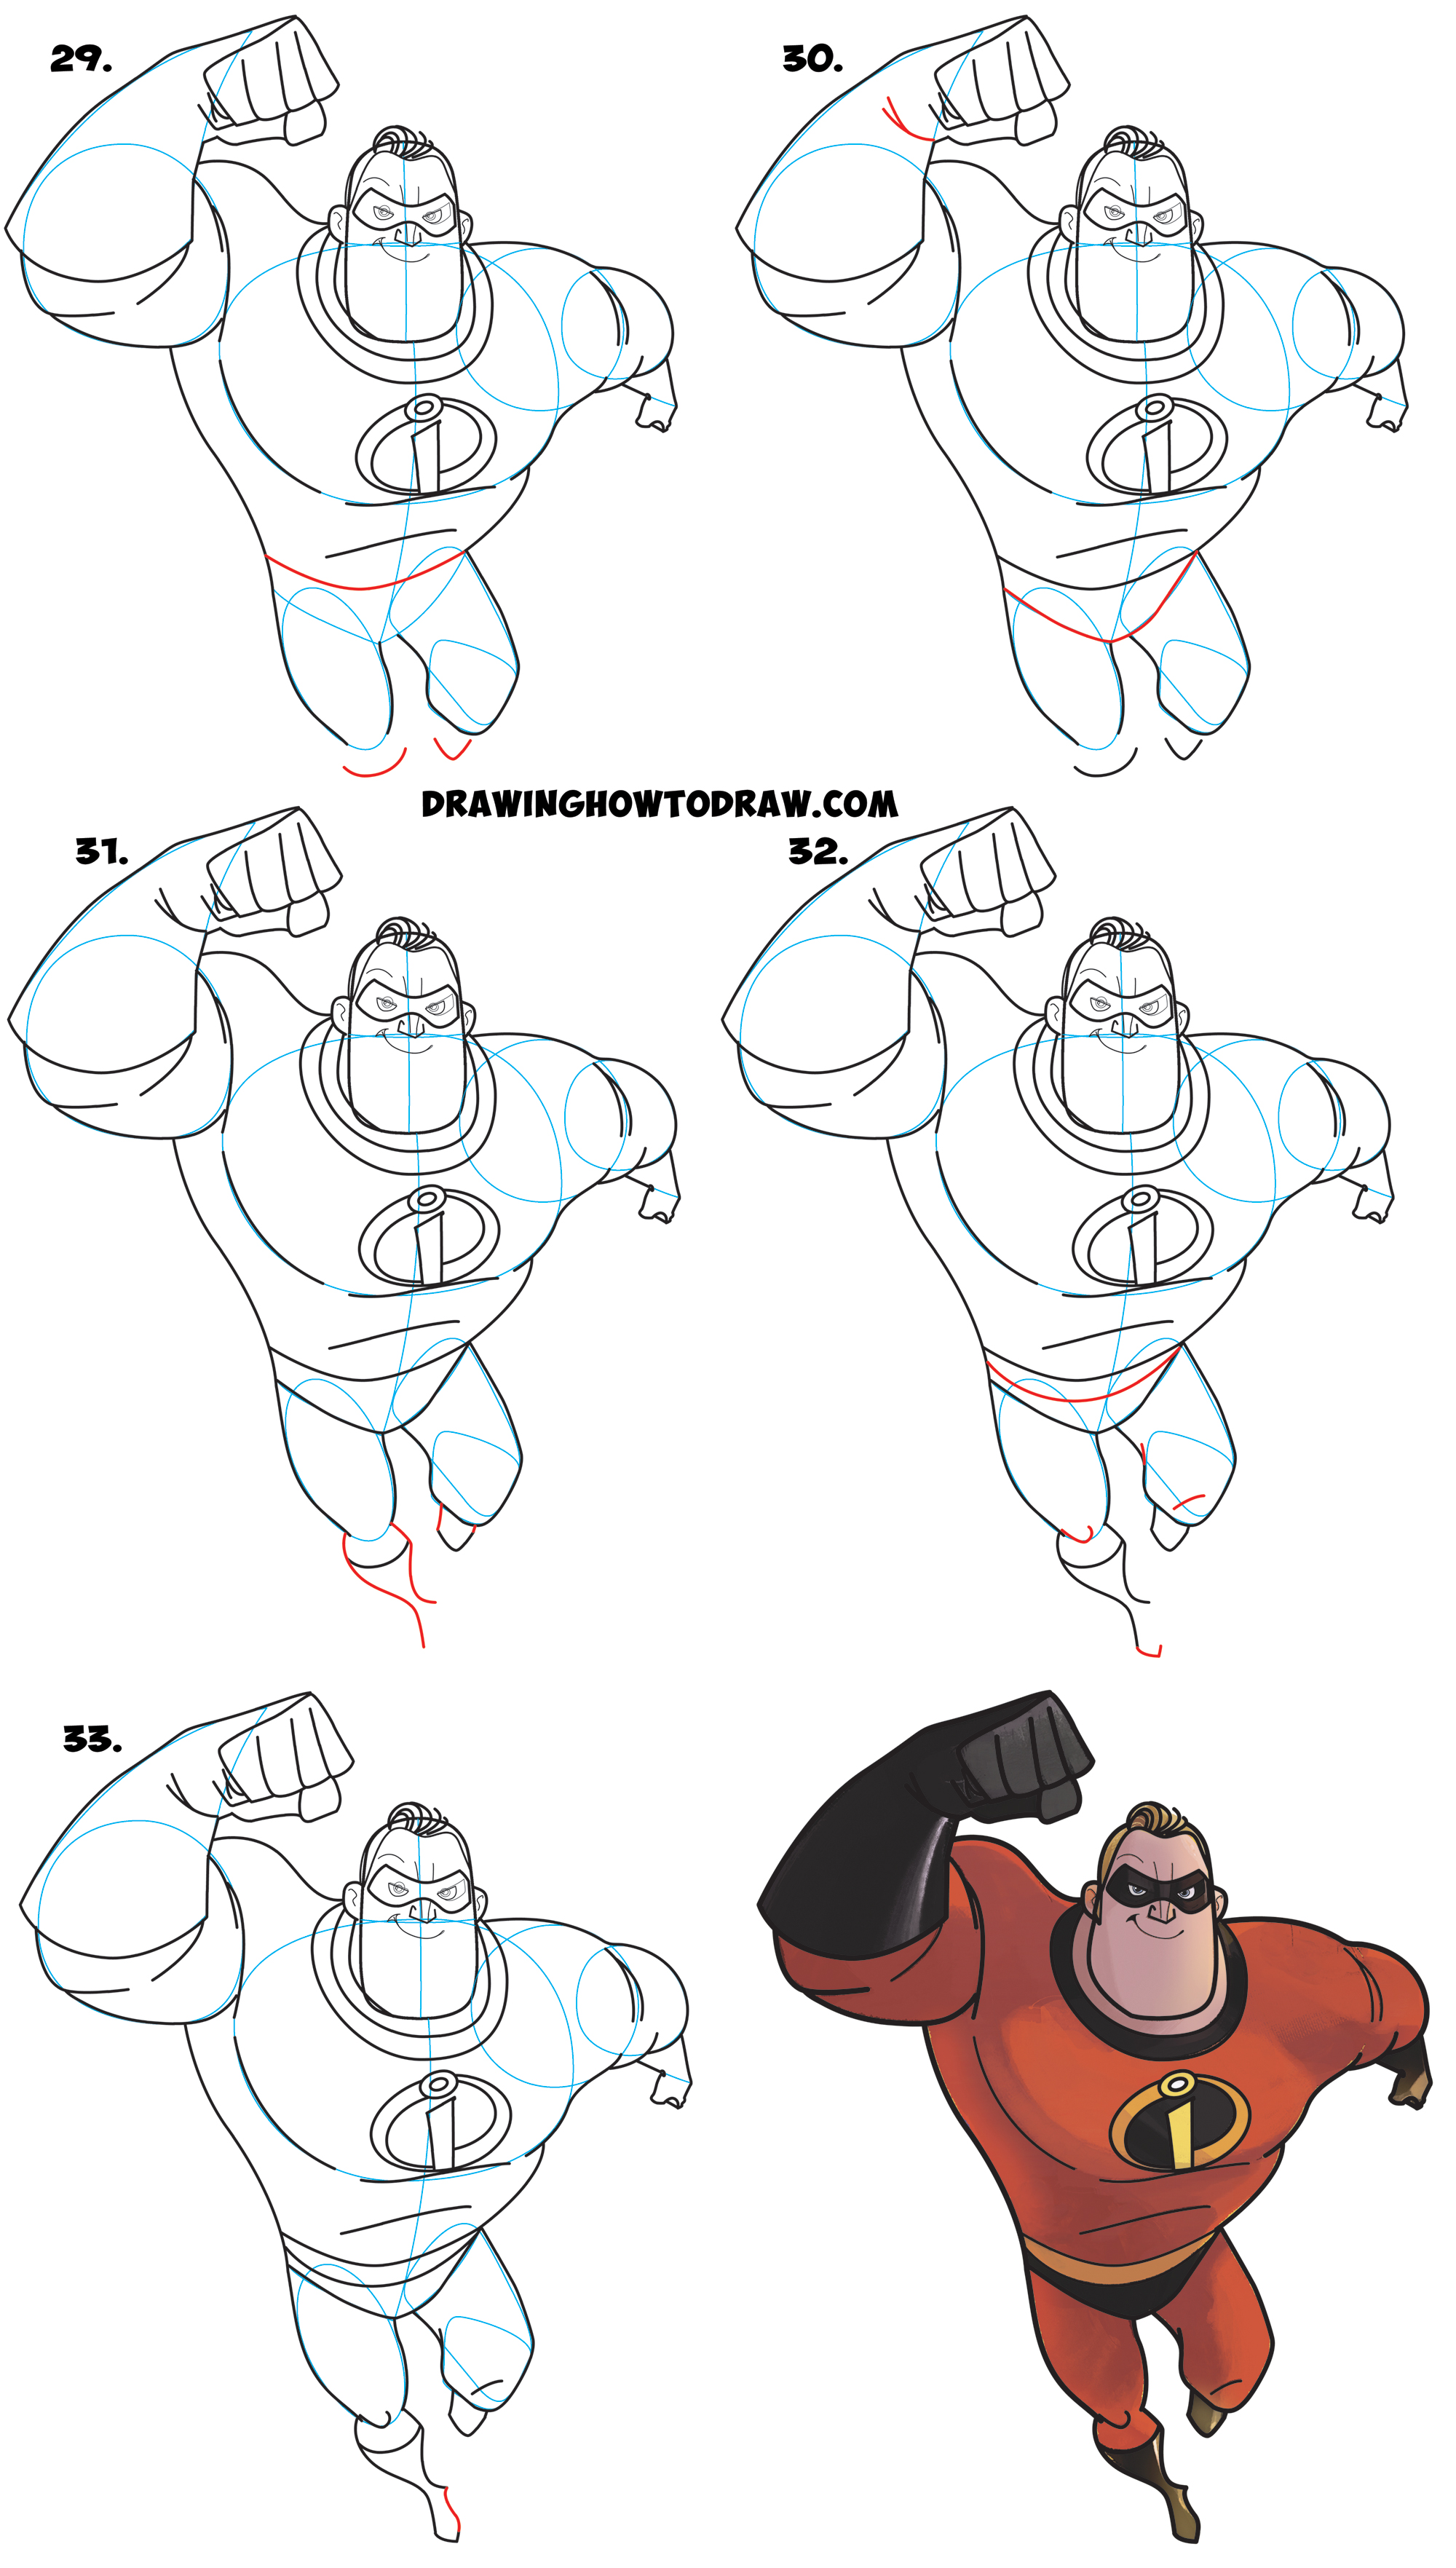 Learn How to Draw Mr. Incredible from The Incredibles 2 (Part 1 of Drawing The Incredibles 2 Family) Easy Step by Step Tutorial